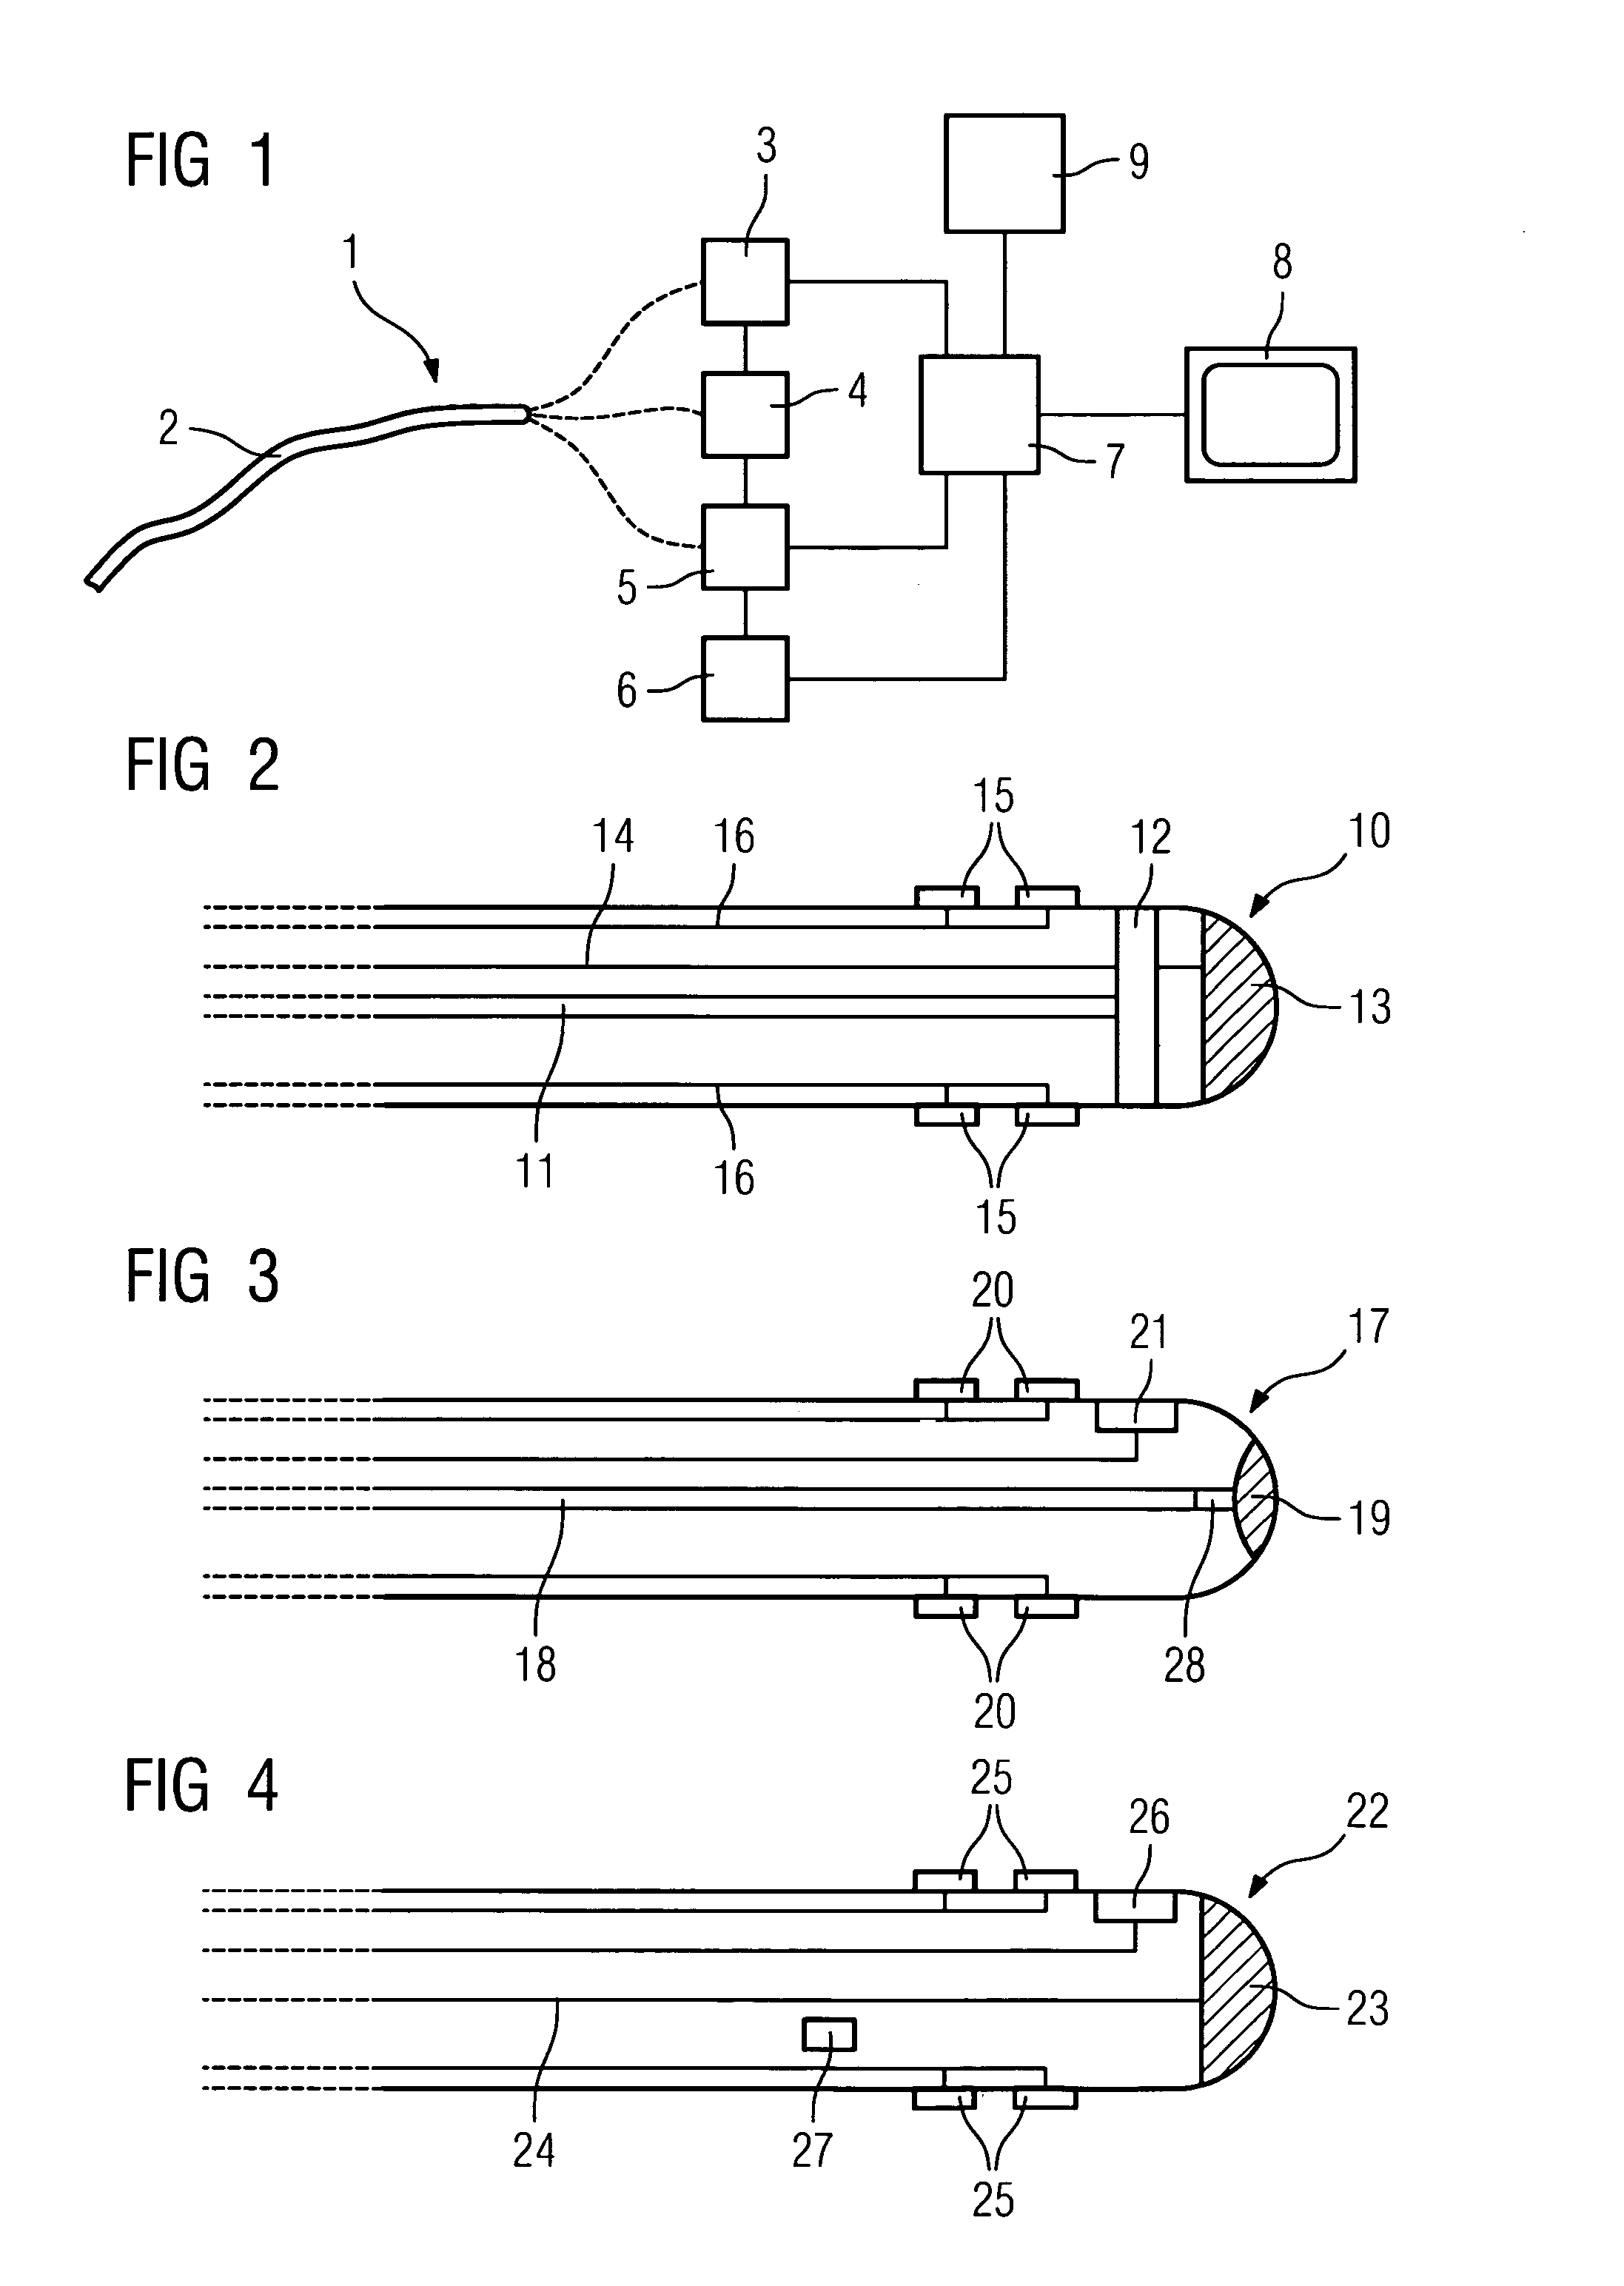 Ablation tip catheter device with integrated imaging, ECG and positioning devices